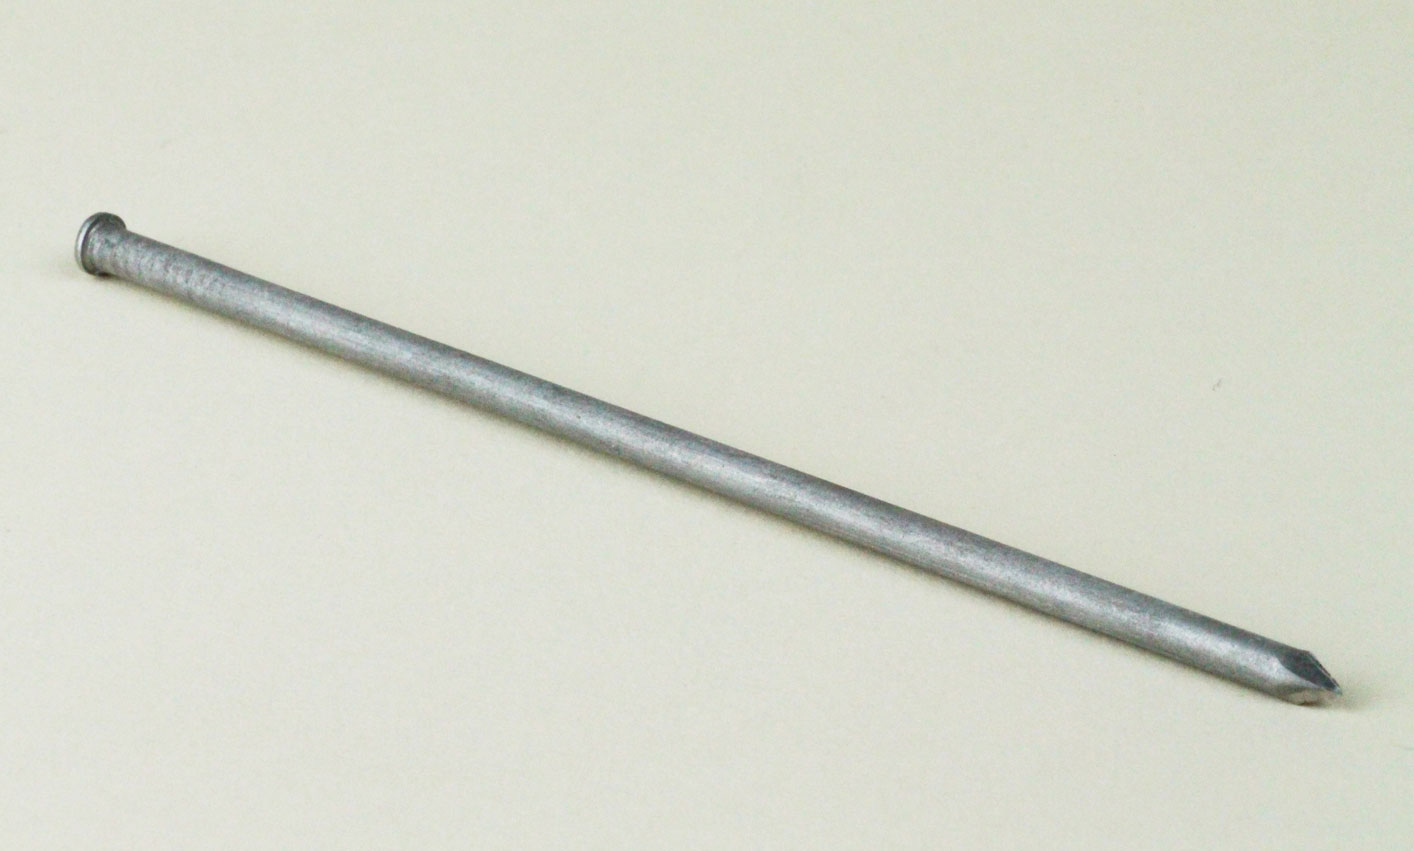 Weld Pin for Walls 4 1/2" Long (SS)